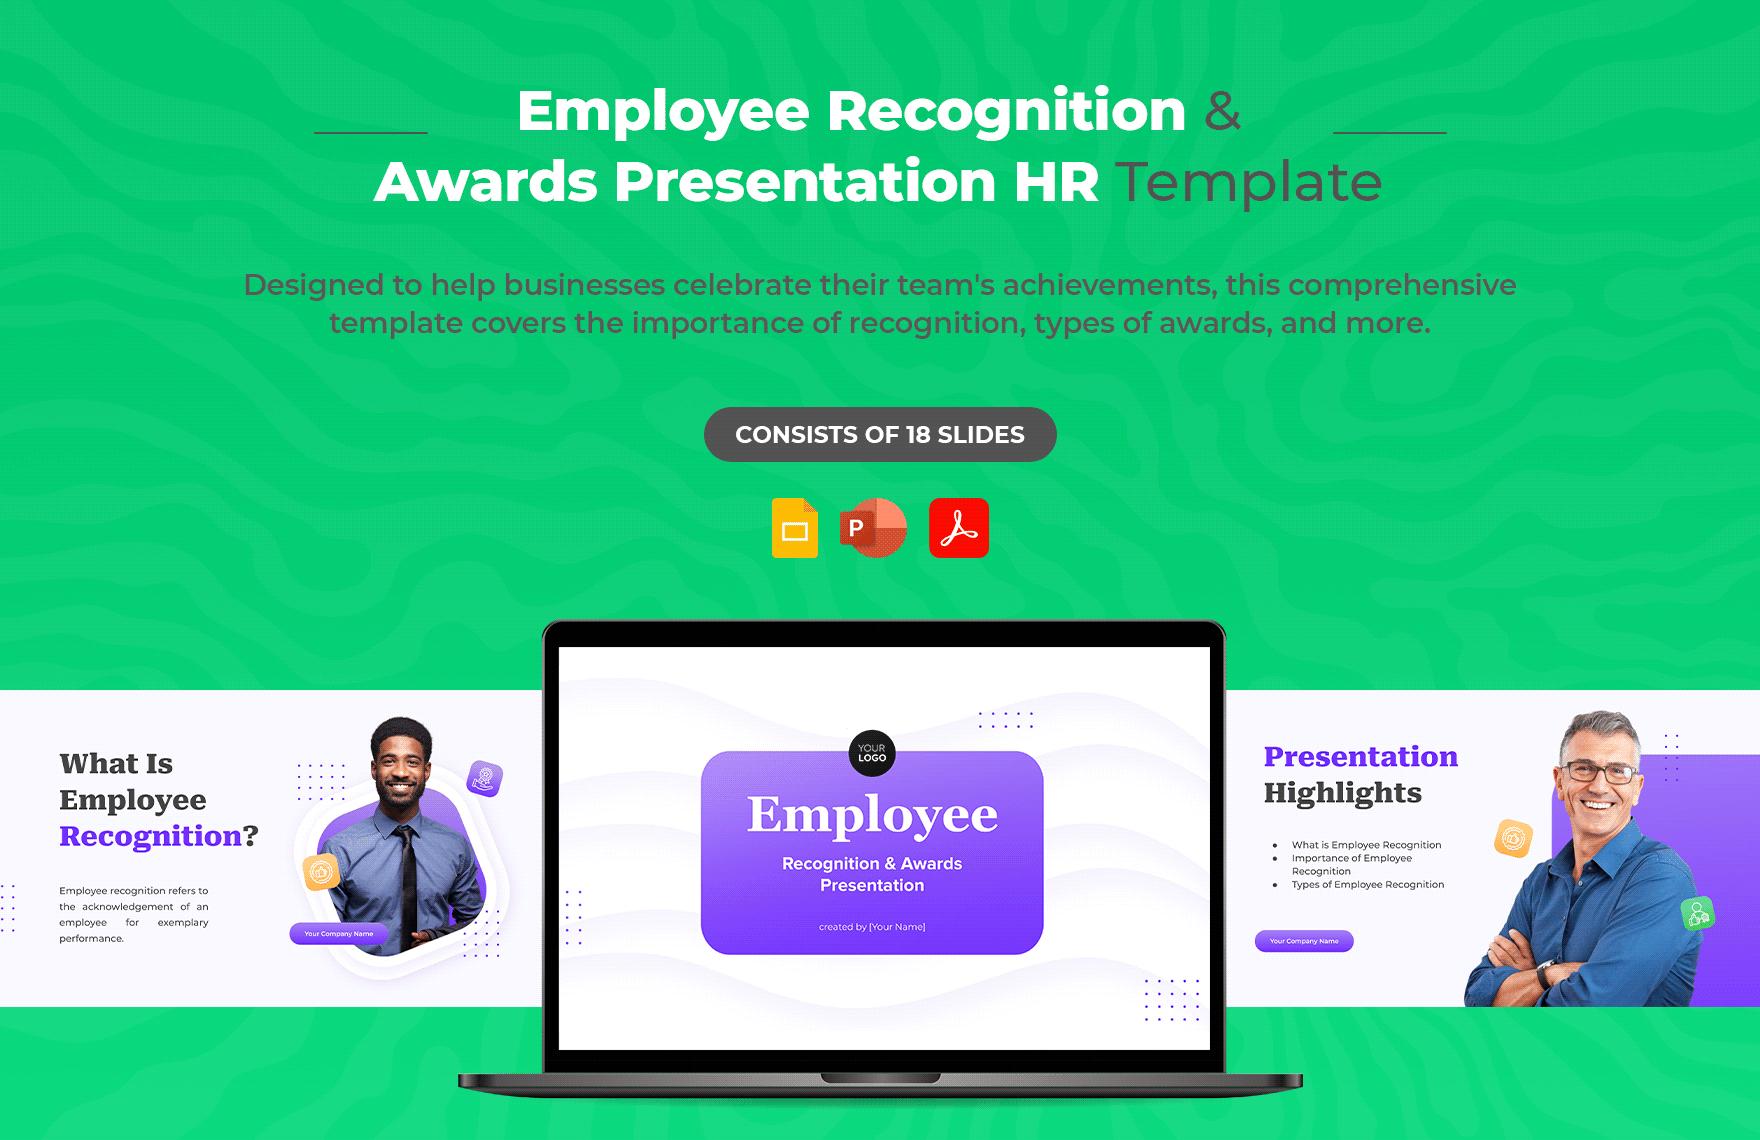 Employee Recognition and Awards Presentation HR Template